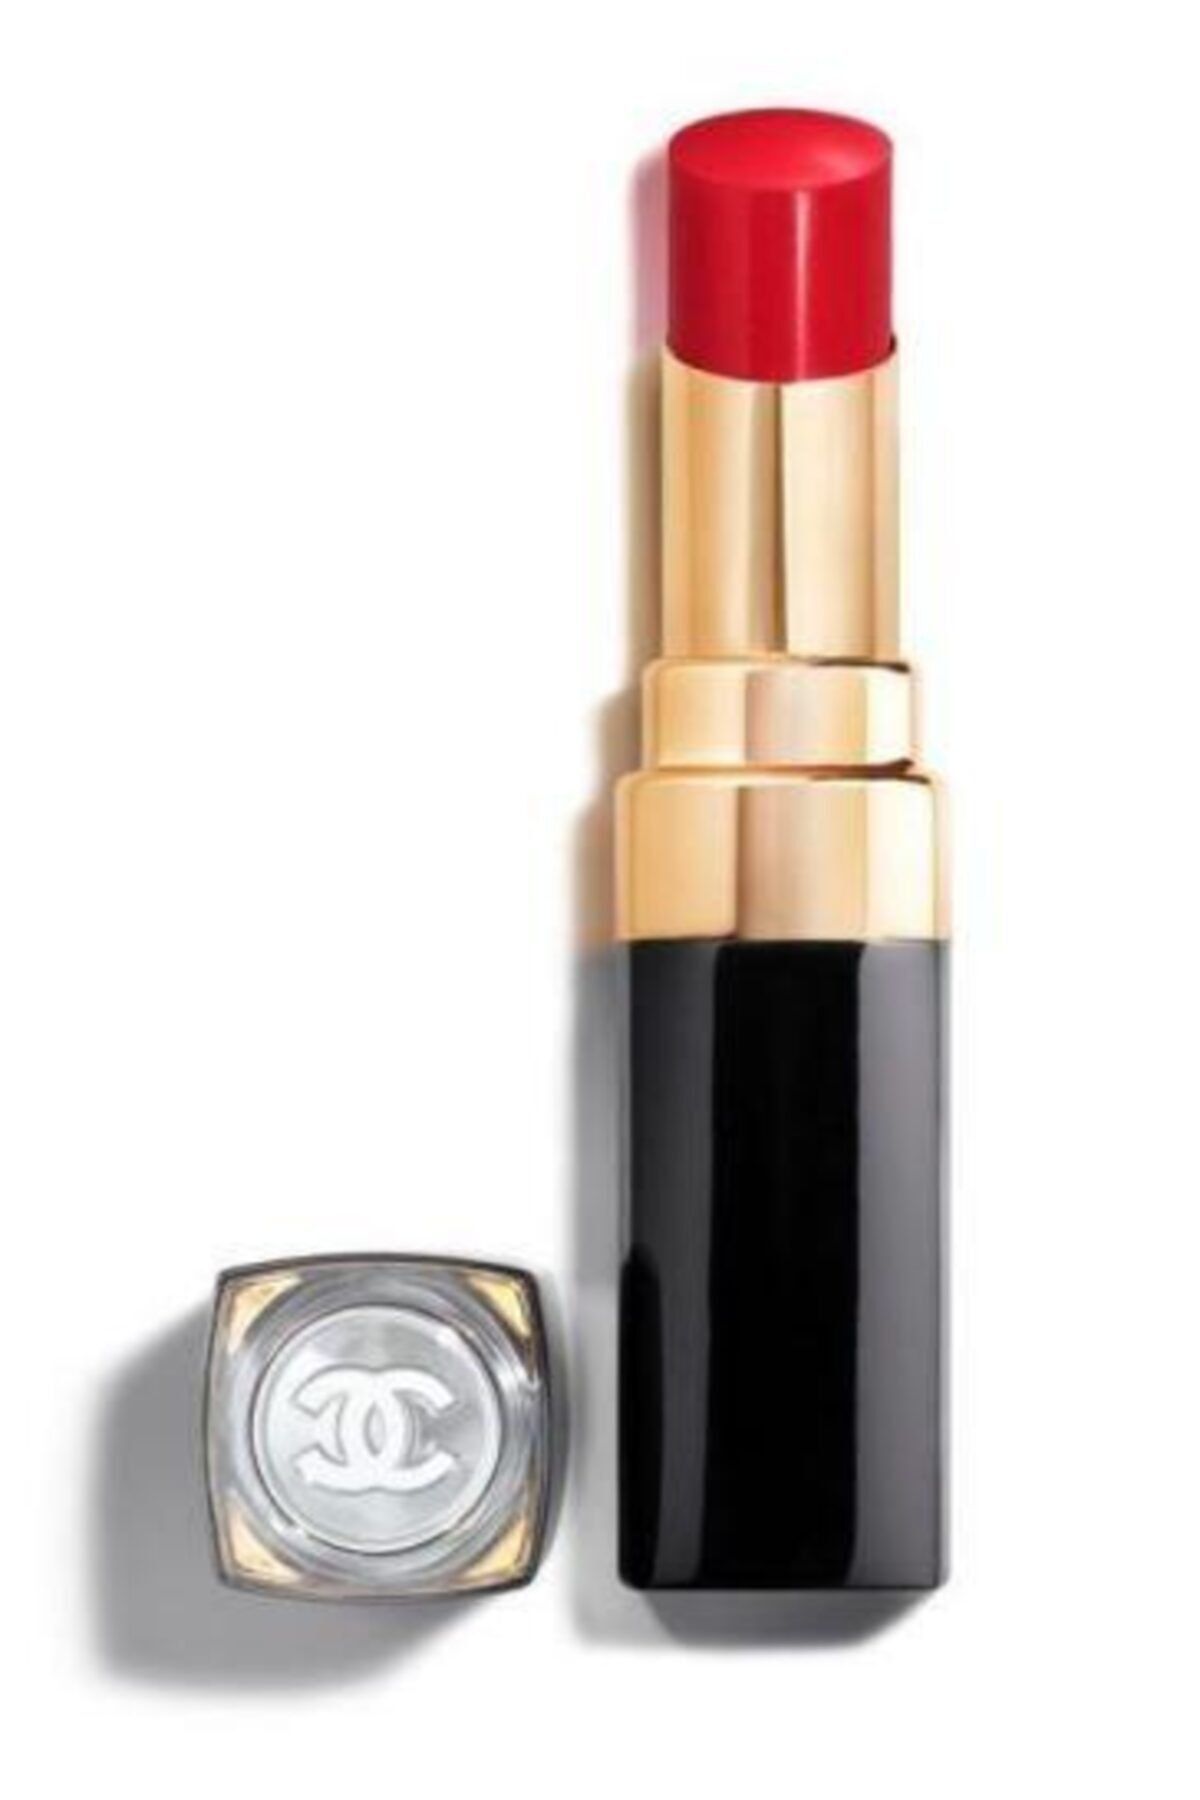 Chanel Rouge Coco Flash Ruj - 68 Ultime